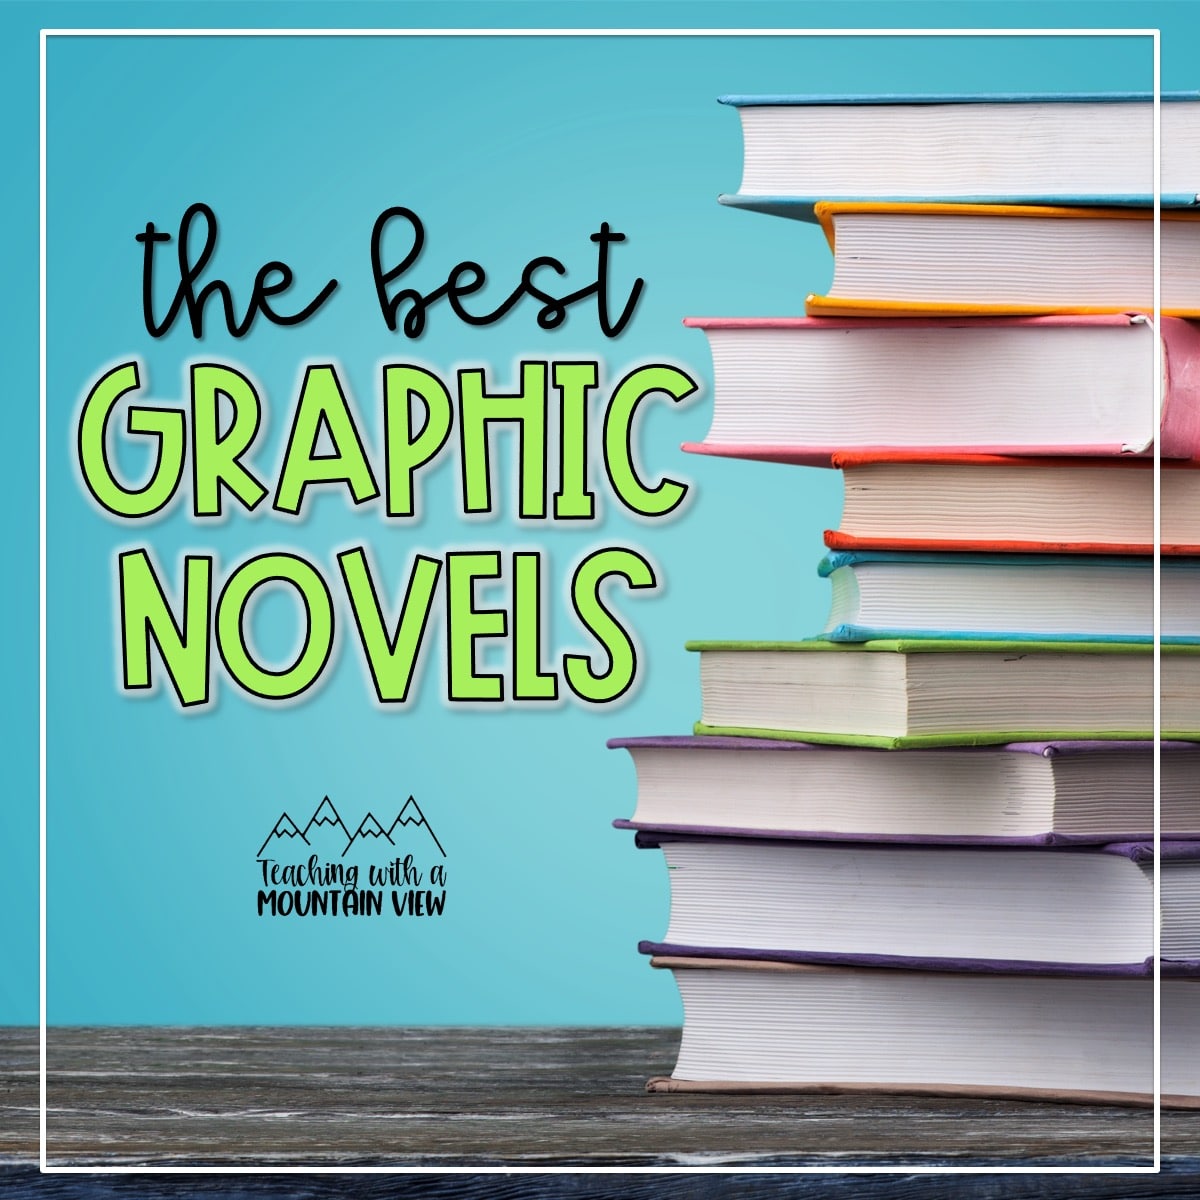 Graphic novels are important tools to use in the upper elementary classroom. Includes recommended graphic novel lists and activities.